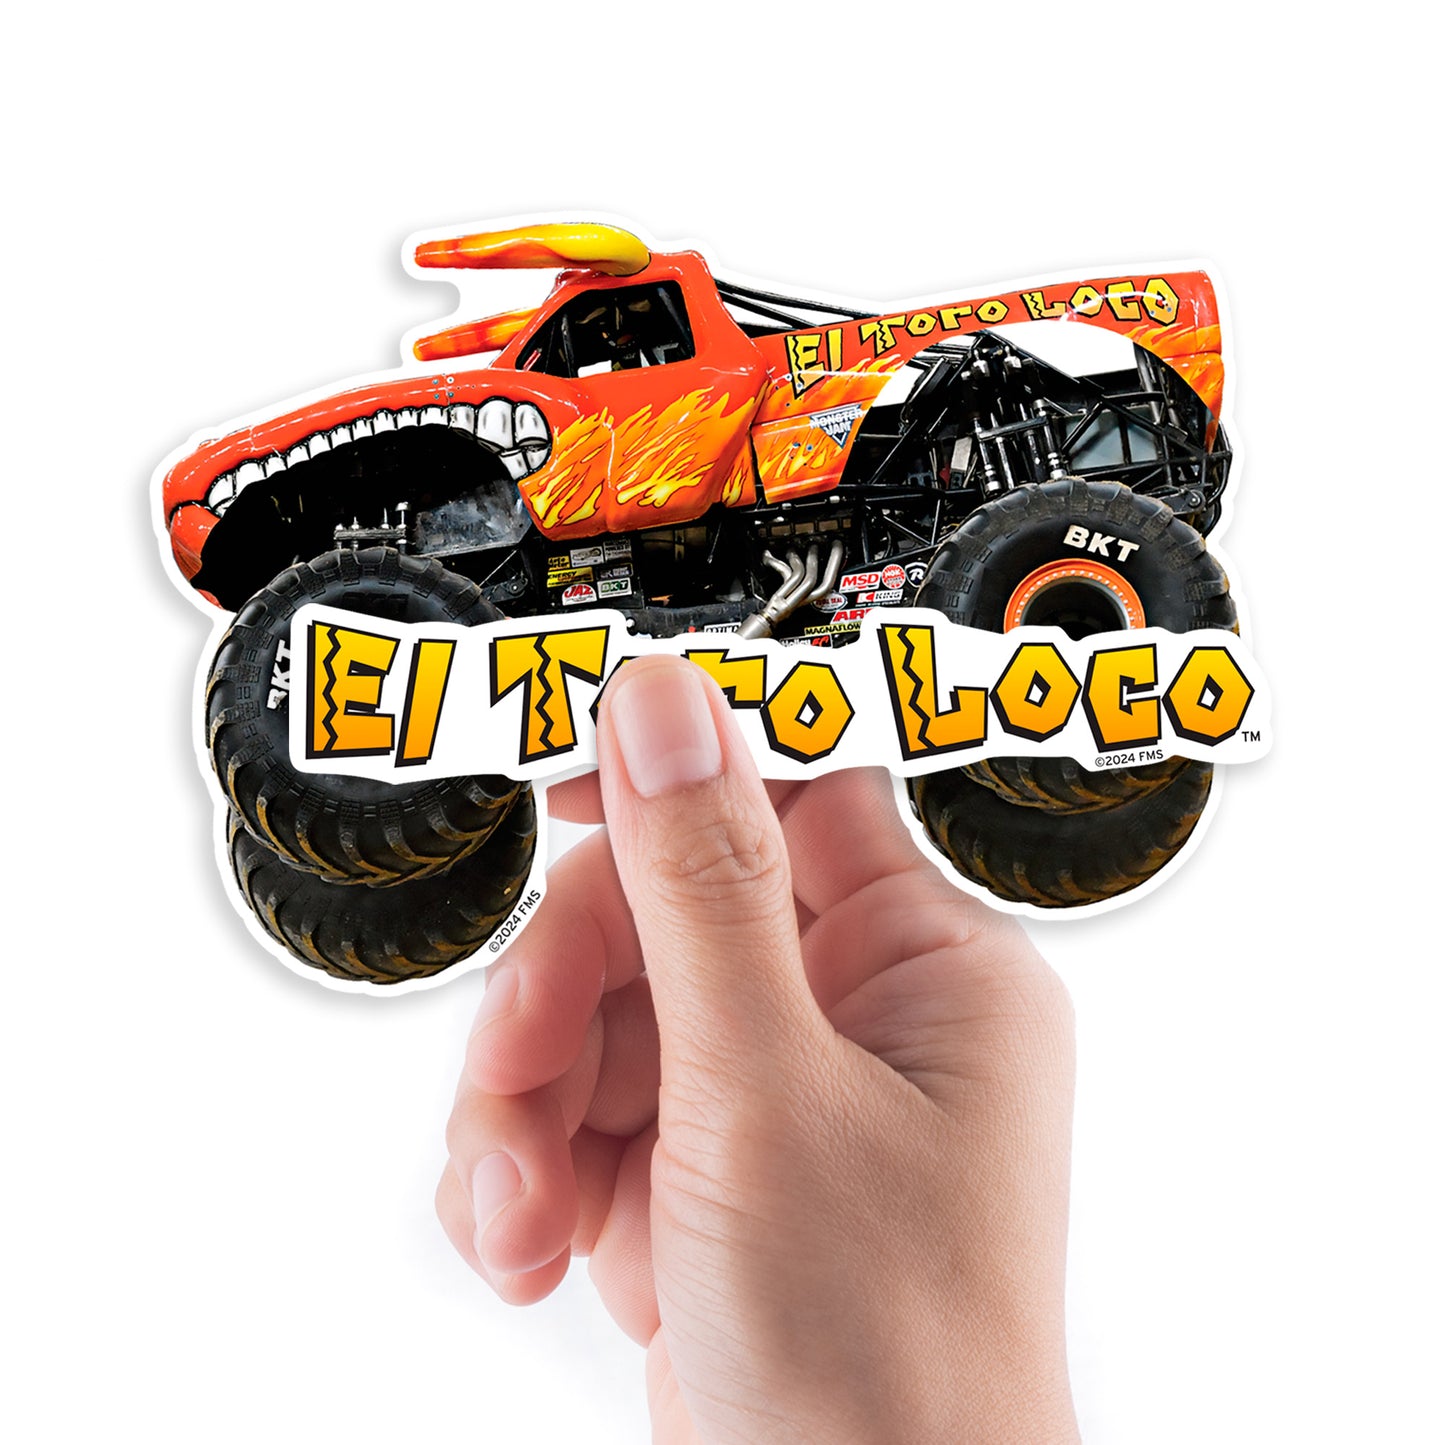 El Toro Loco  Minis        - Officially Licensed Monster Jam Removable     Adhesive Decal